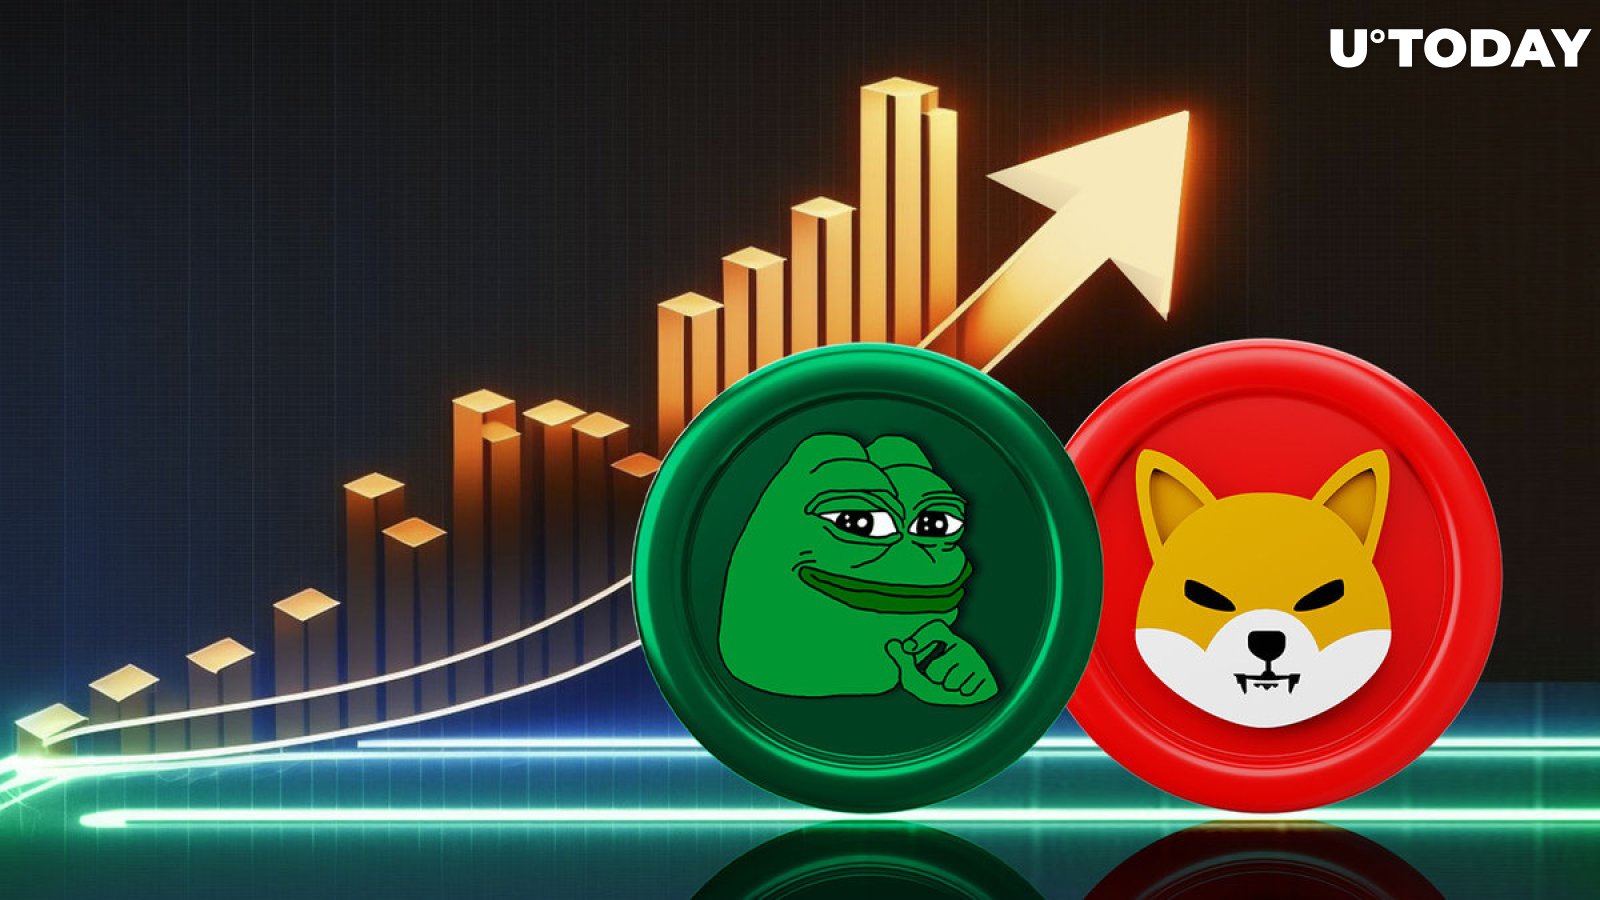 Meme Coins Like PEPE and Shiba Inu (SHIB) Are Surging: What's Up?